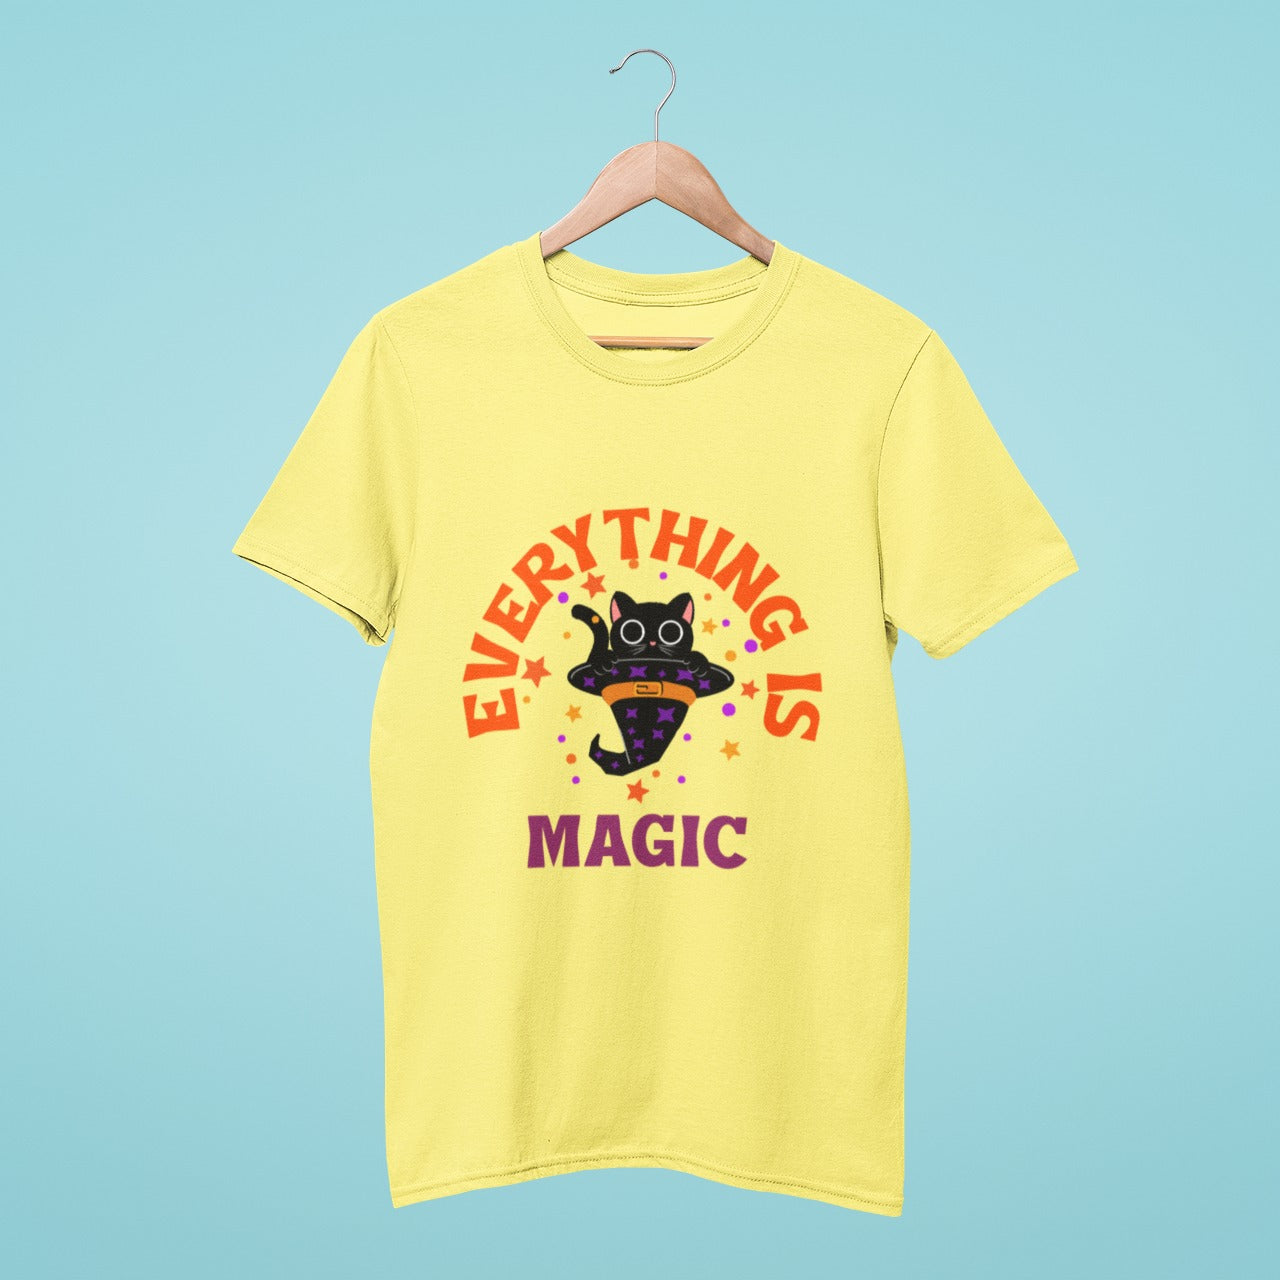 Our yellow "Everything is Magic" t-shirt features a playful black cat in a hat design and soft cotton fabric. The sunny color and whimsical slogan add a touch of joy to your day, while optimized keywords make it easy to find online. Add some magic to your wardrobe today!